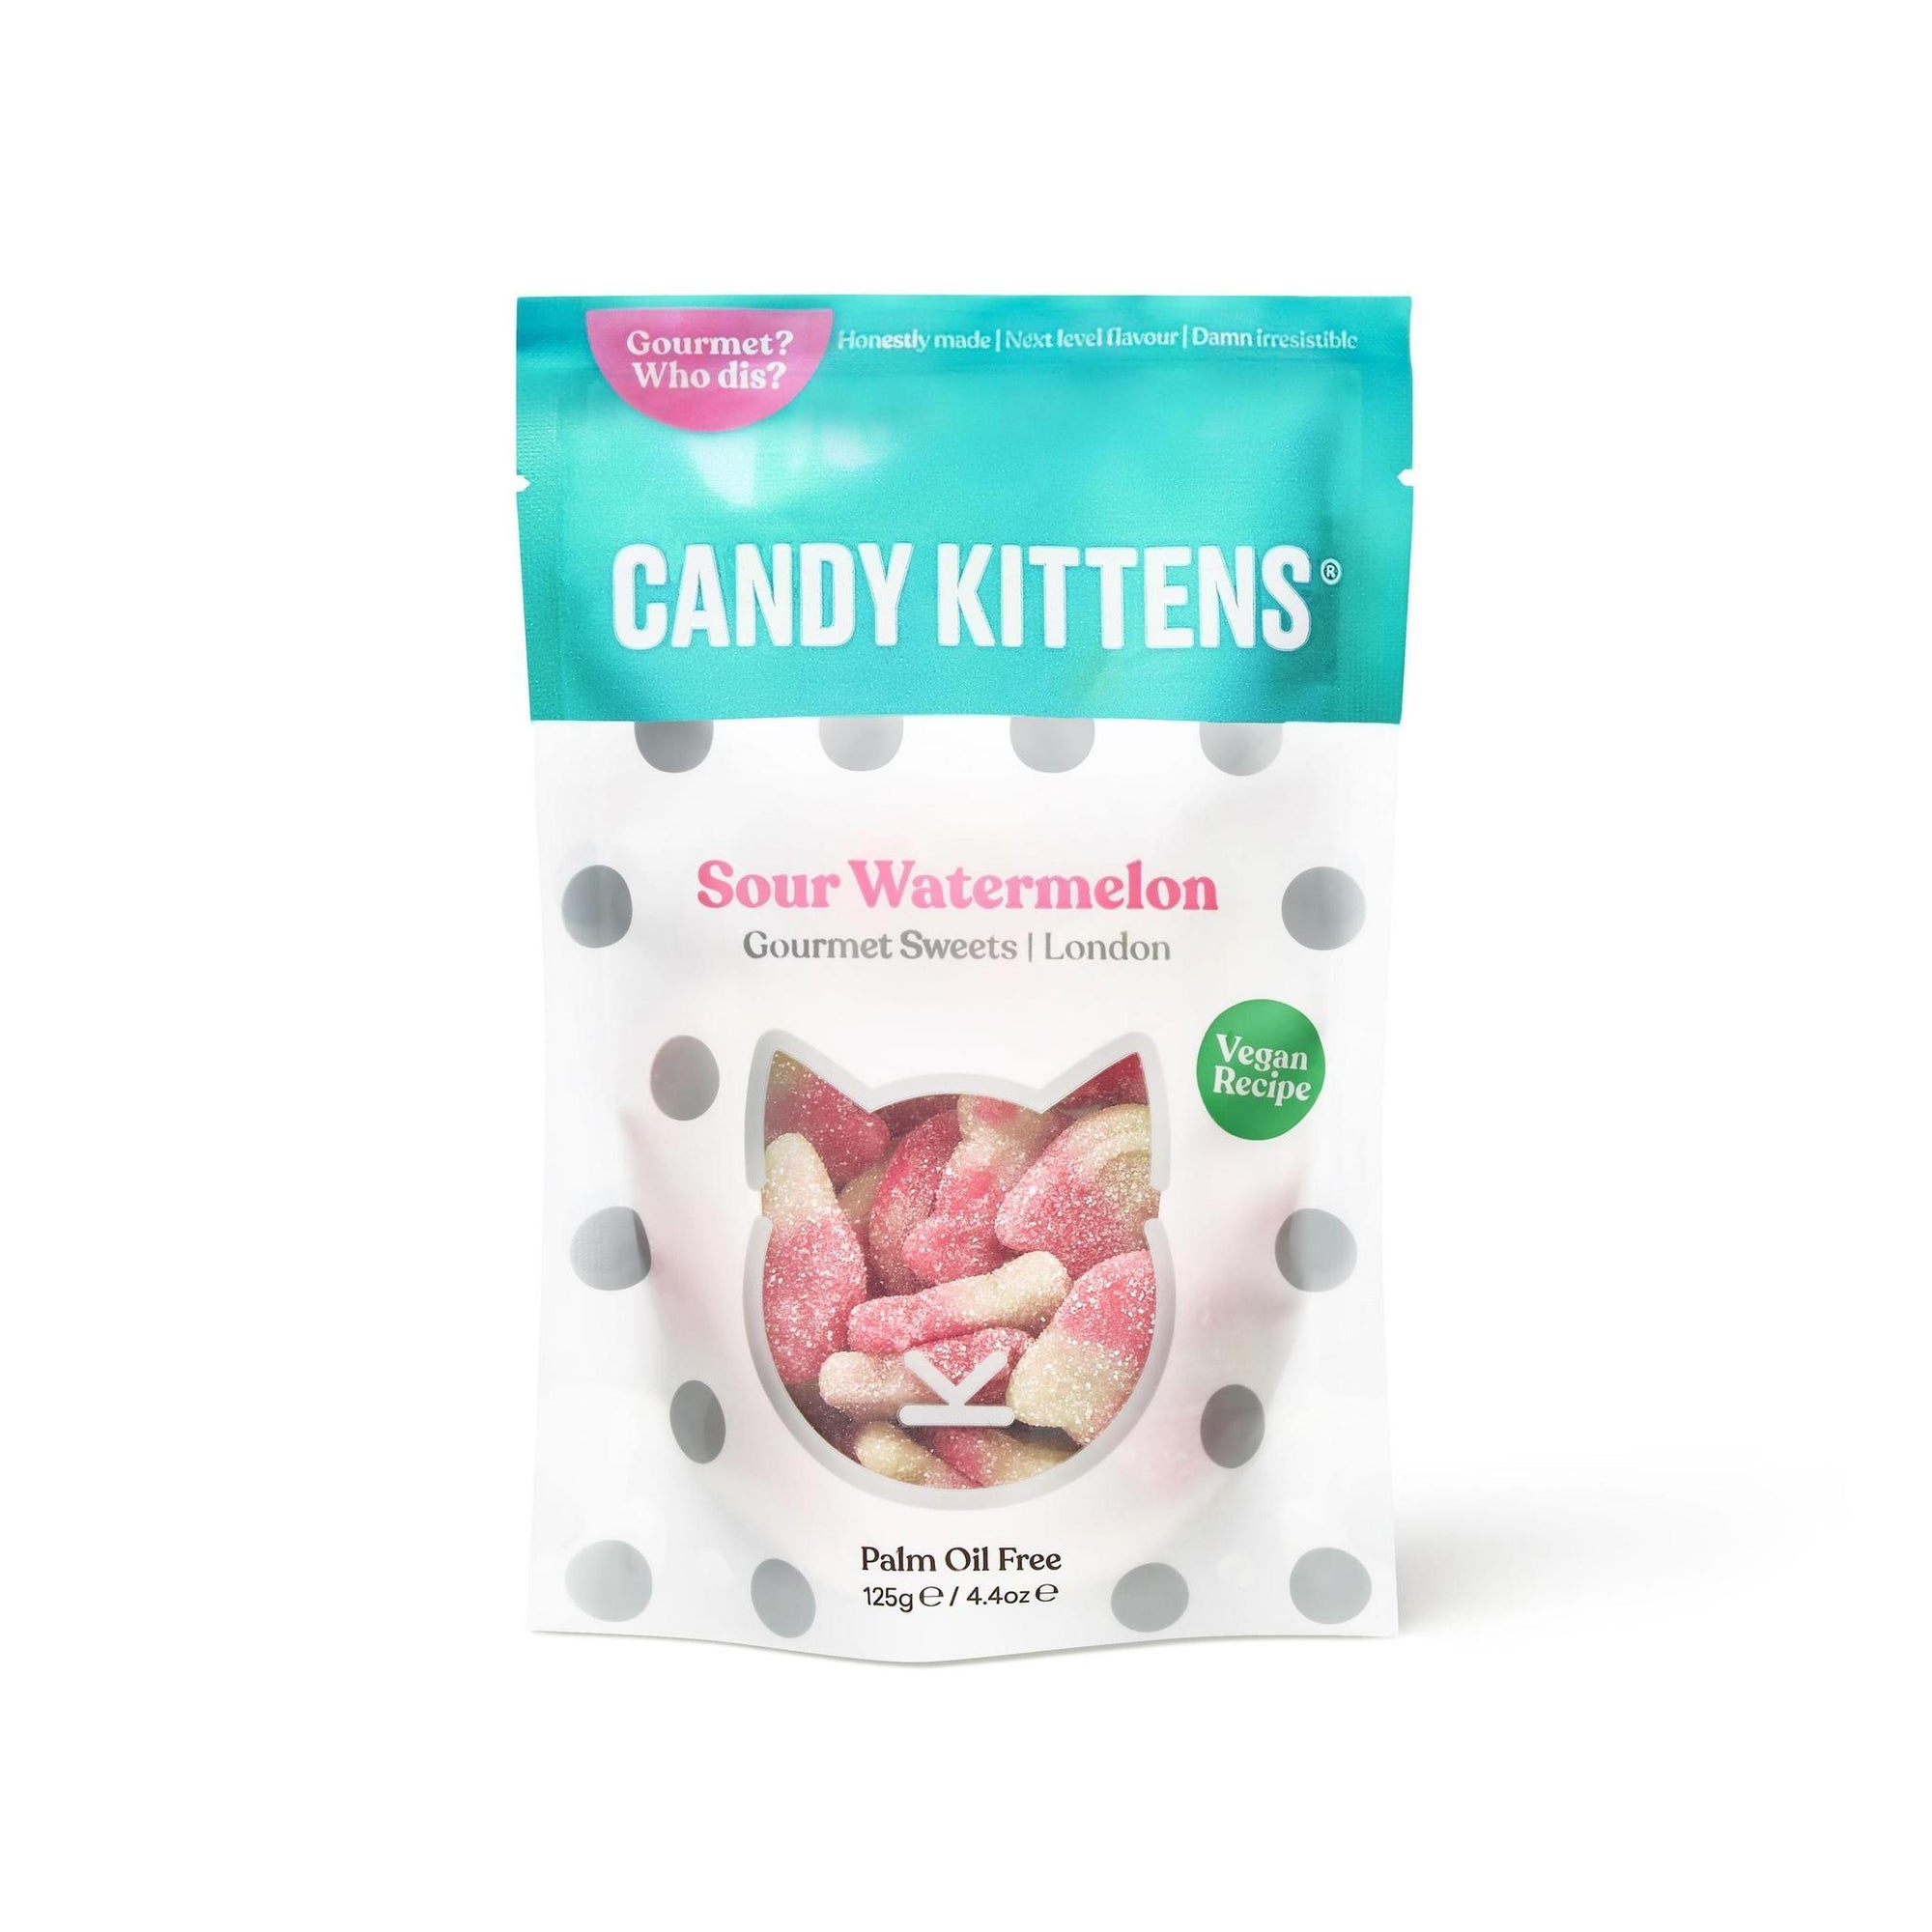 Sour Watermelon Candy Kittens Gourmet Gummy Sweets